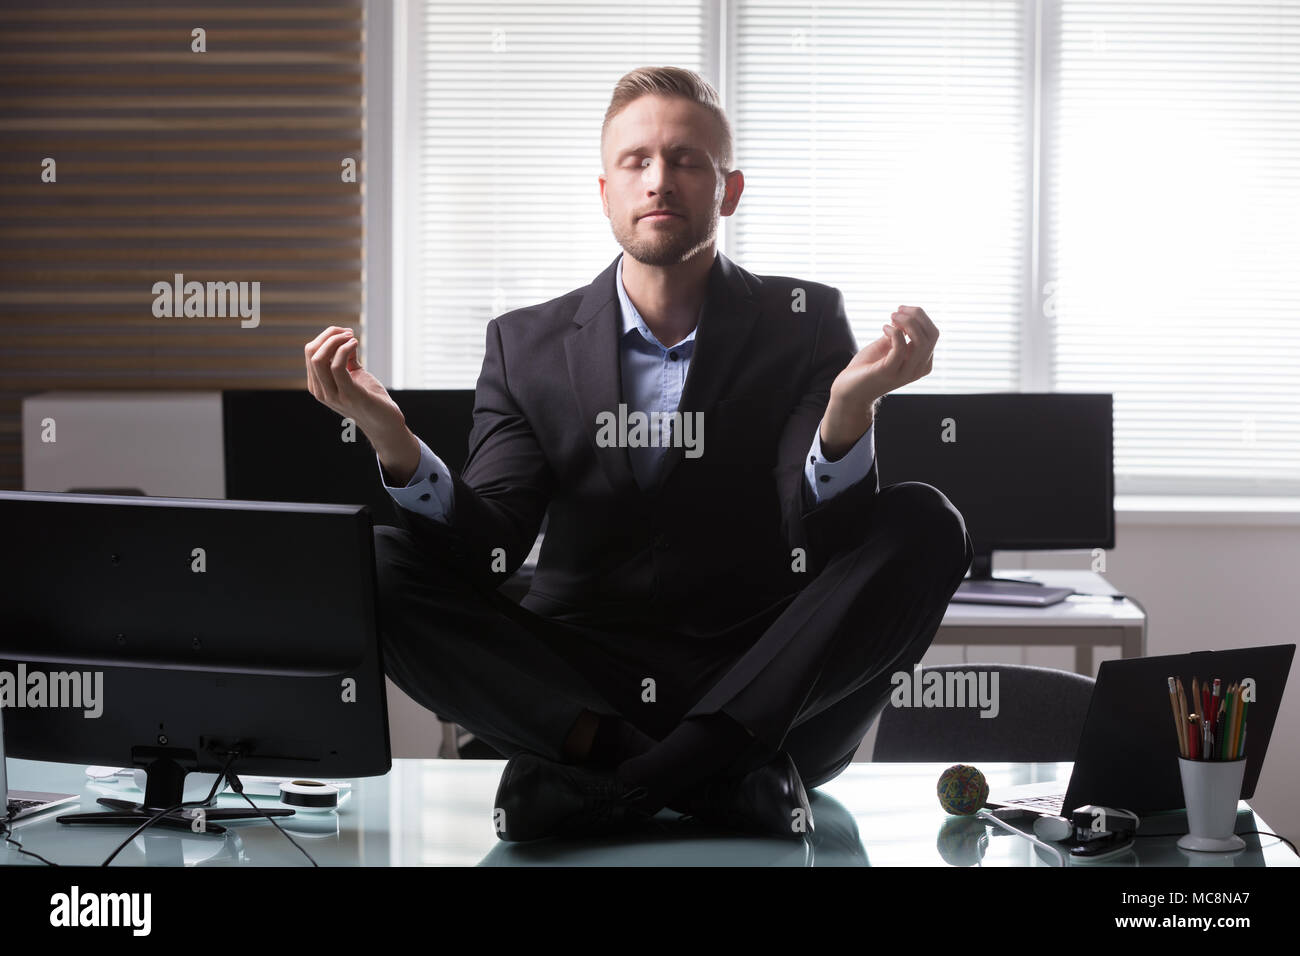 Young Businessman Sitting on Desk In Office Banque D'Images